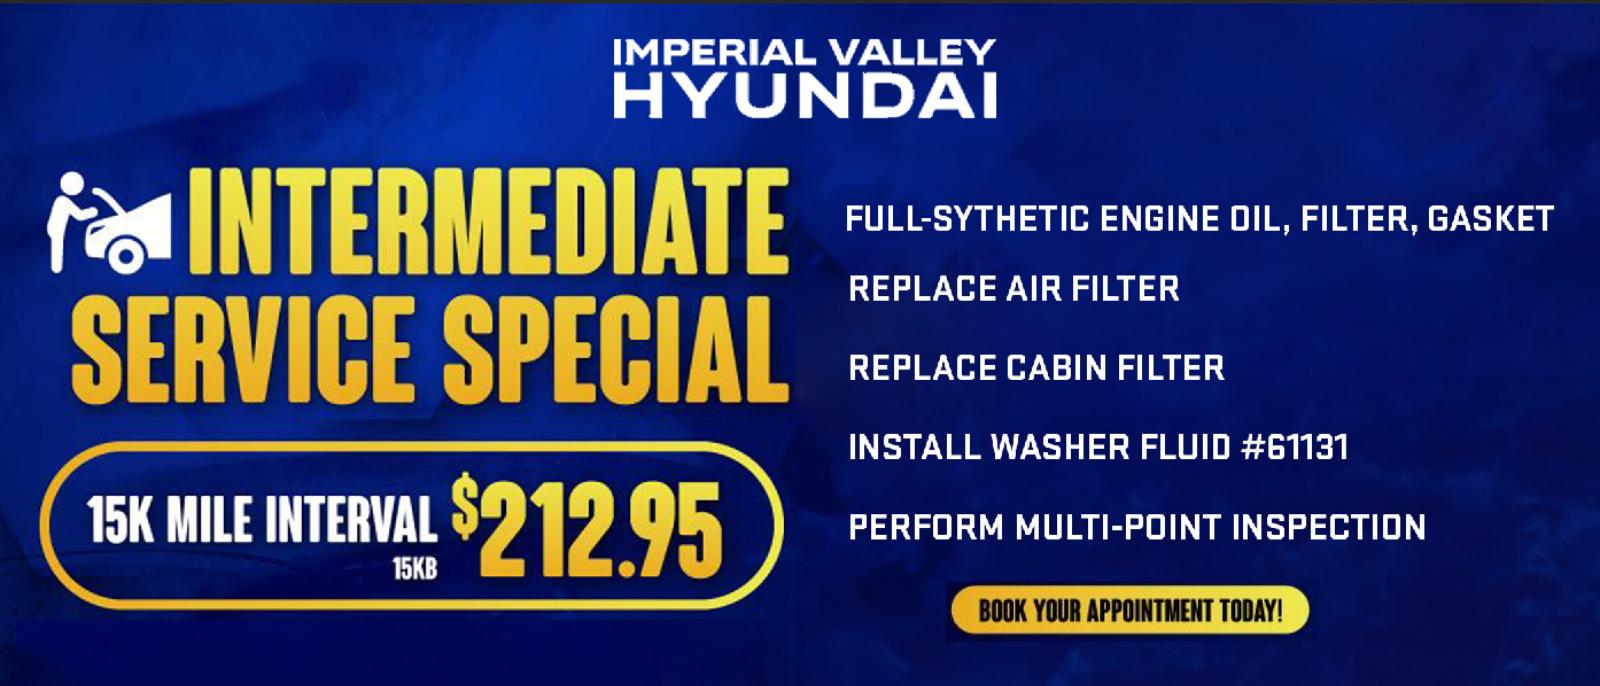 INTERMEDIATE SERVICE SPECIAL 
15K MILE INTERVAL $212.95 15KB

FULL-SYTHETIC ENGINE OIL, FILTER, GASKET 
REPLACE AIR FILTER 
REPLACE CABIN FILTER 
INSTALL WASHER FLUID #61131 
PERFORM MULTI-POINT INSPECTION